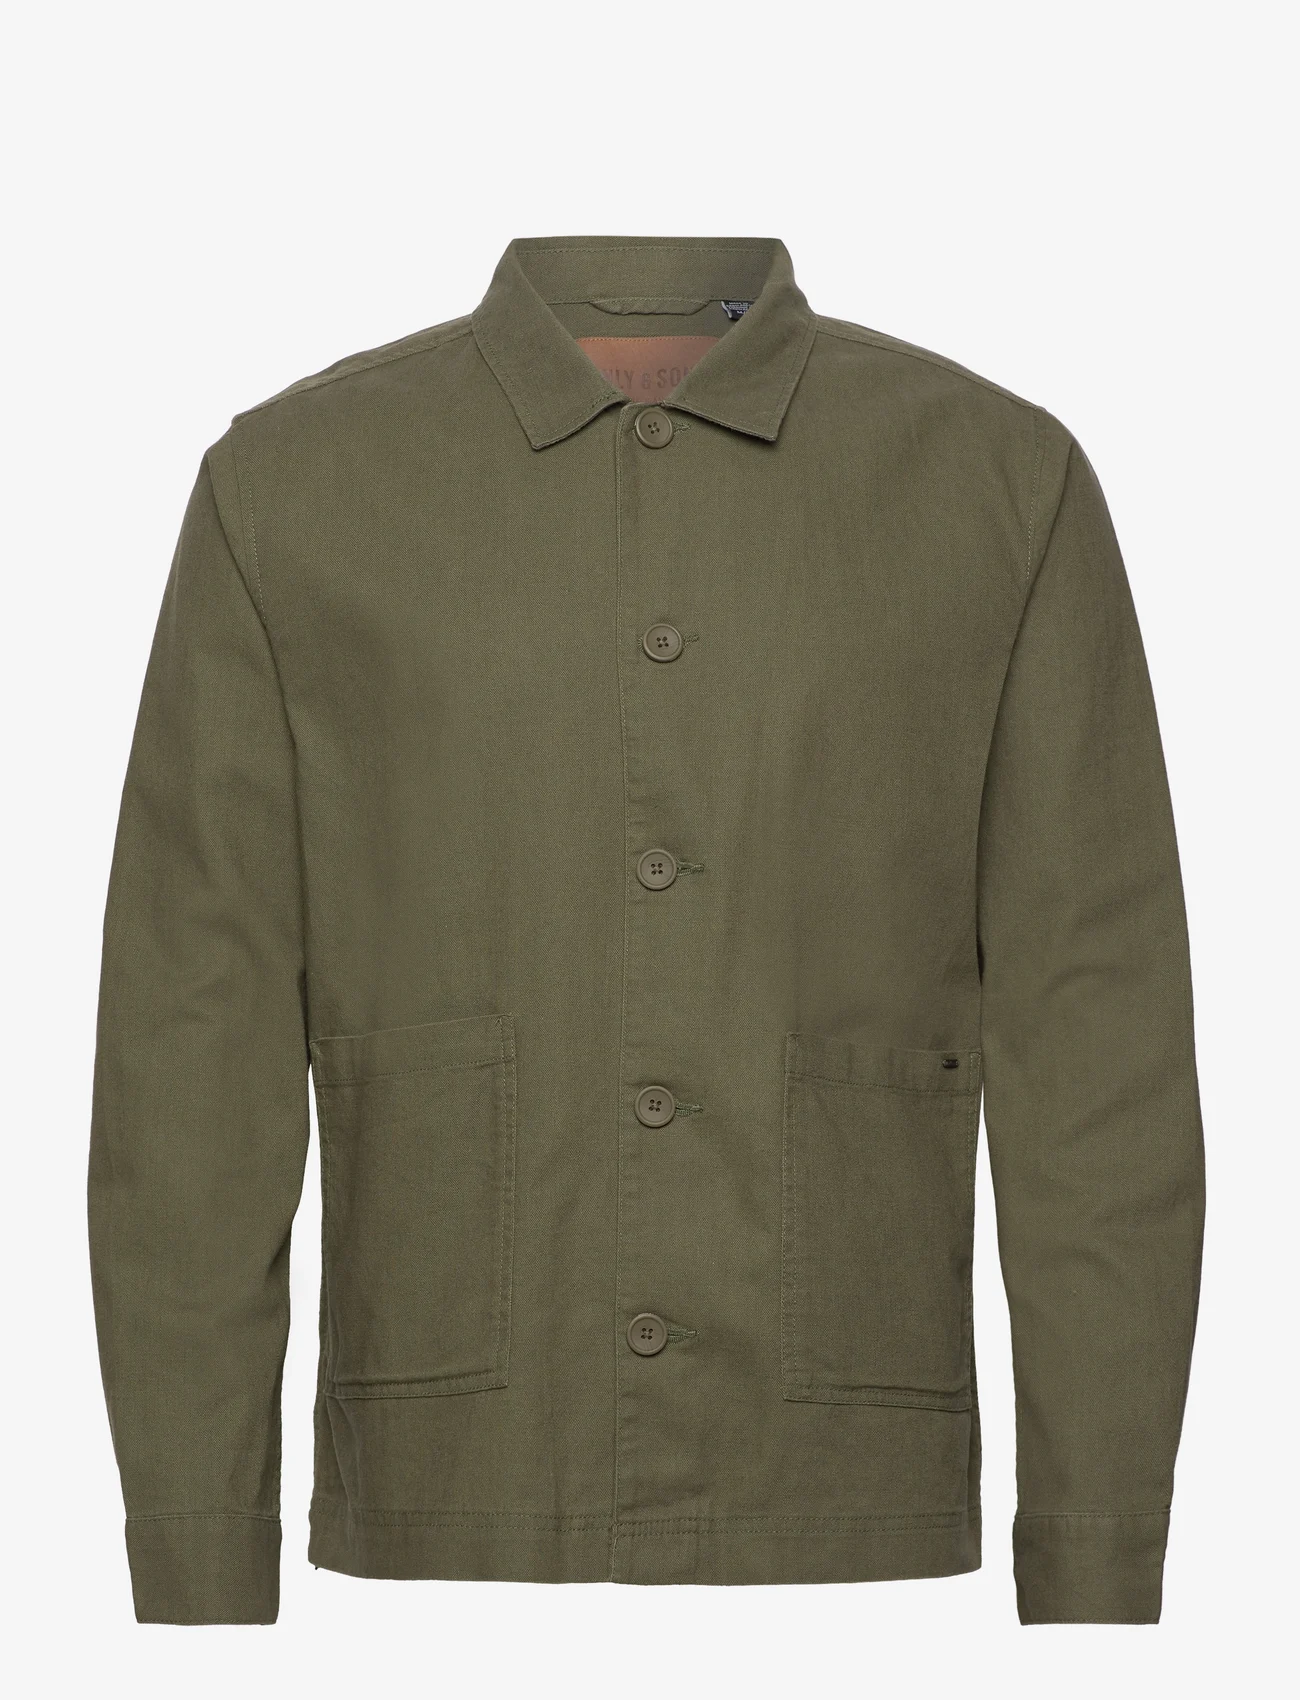 ONLY & SONS - ONSKIER 0019 COT LIN OVERSHIRT - herren - olive night - 0